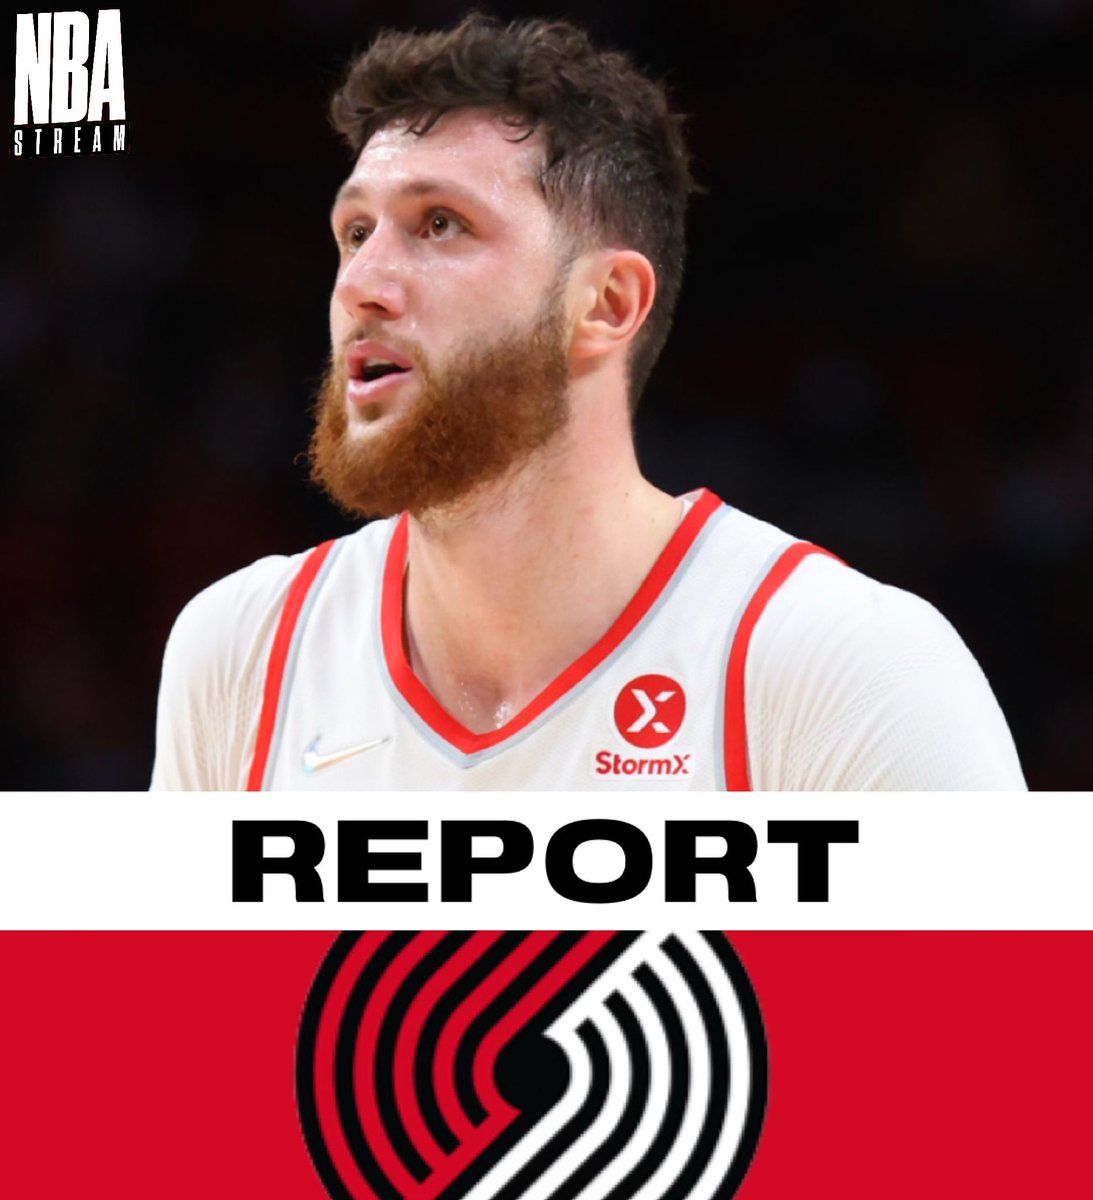 Jusuf Nurkic says he does not expect to be traded and hopes to remain with Portland beyond this season, per @jwquick.

Nurkic will be an unrestricted free agent this offseason. https://t.co/sLoZhiYsCG